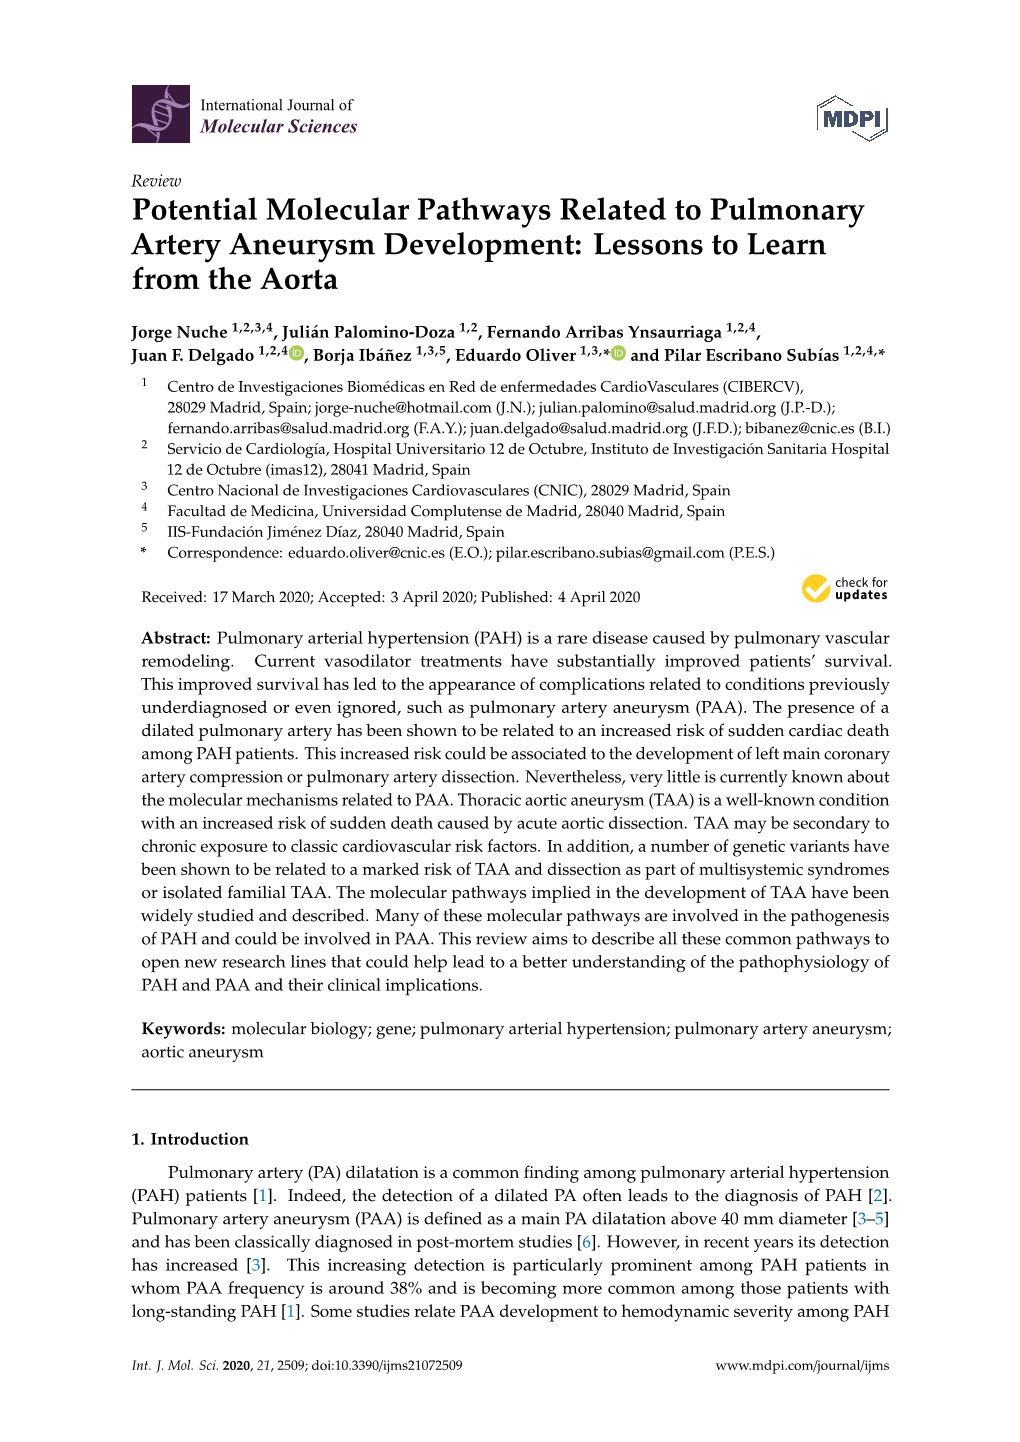 Potential Molecular Pathways Related to Pulmonary Artery Aneurysm Development: Lessons to Learn from the Aorta